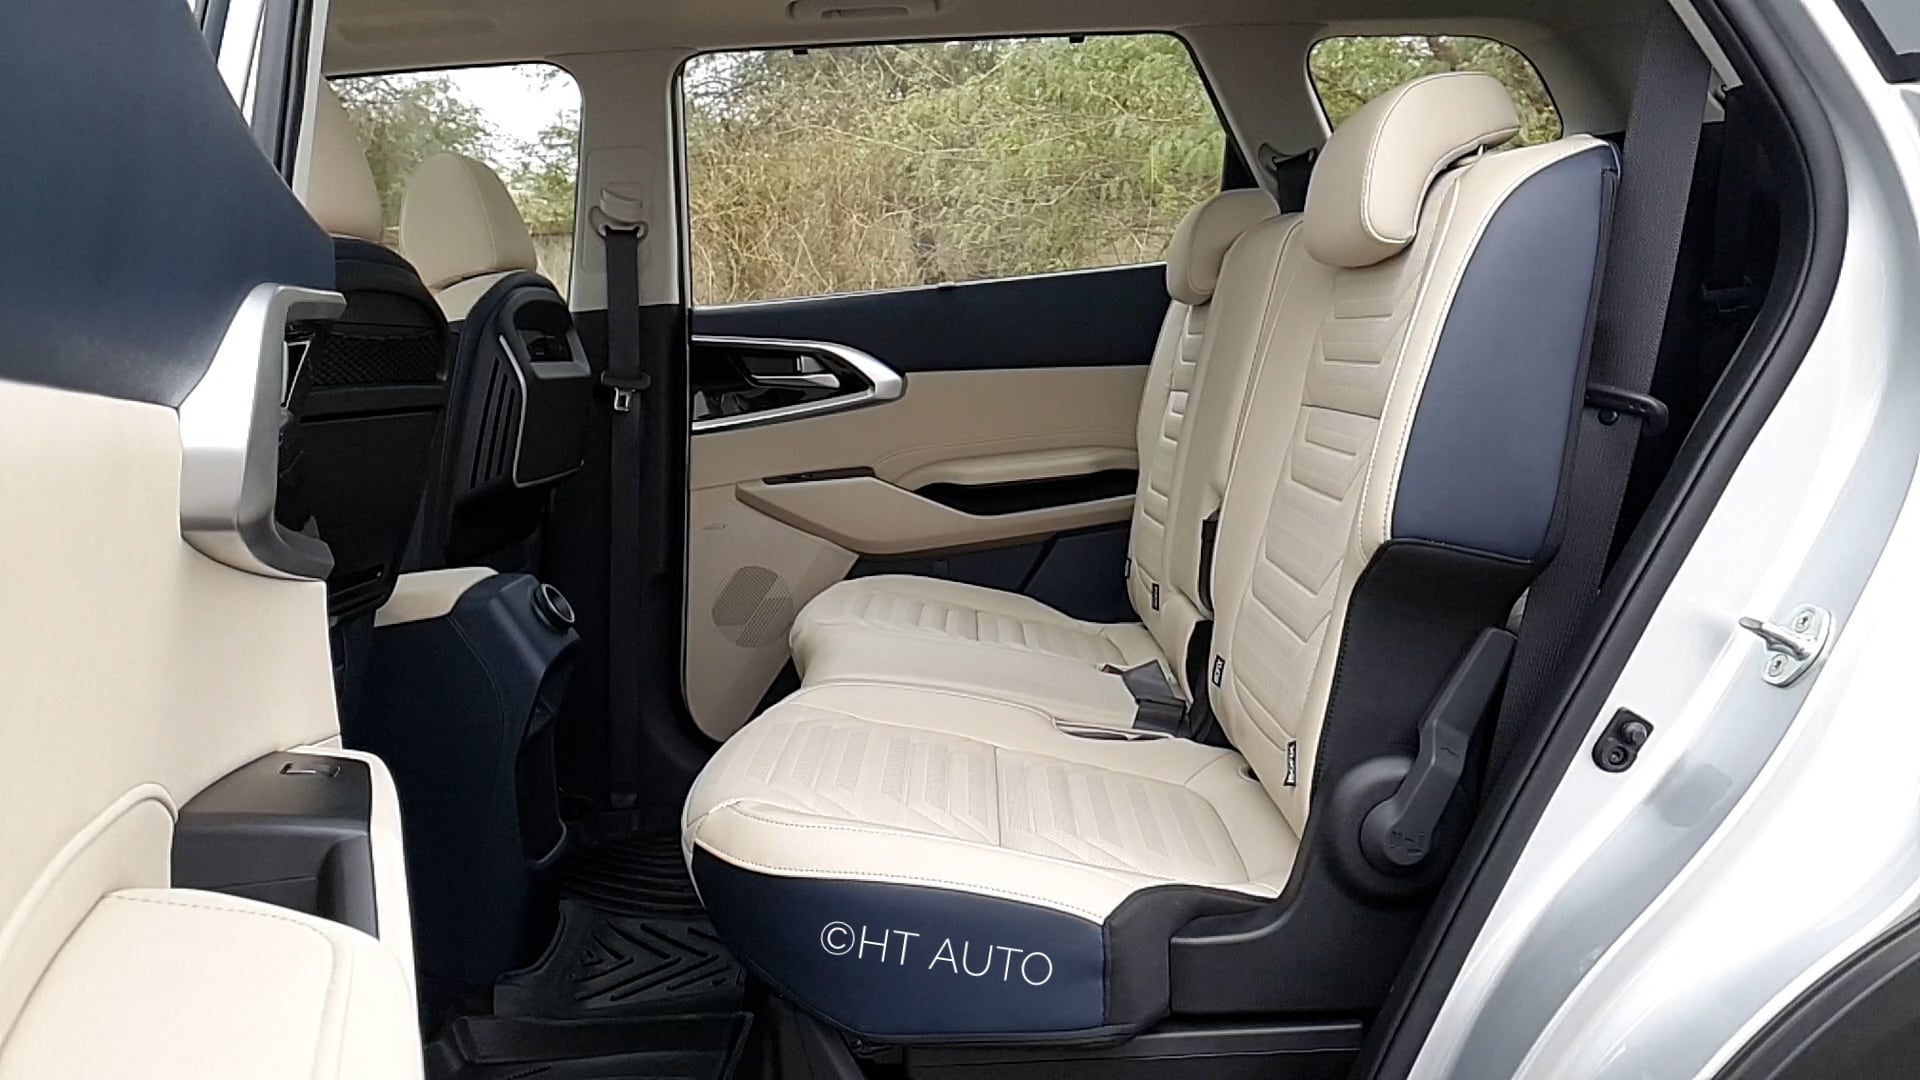 Carens from Kia is available in a six-seat layout but even in the seven-seat layout, three passengers in the middle row won't exactly be packed like sardines.